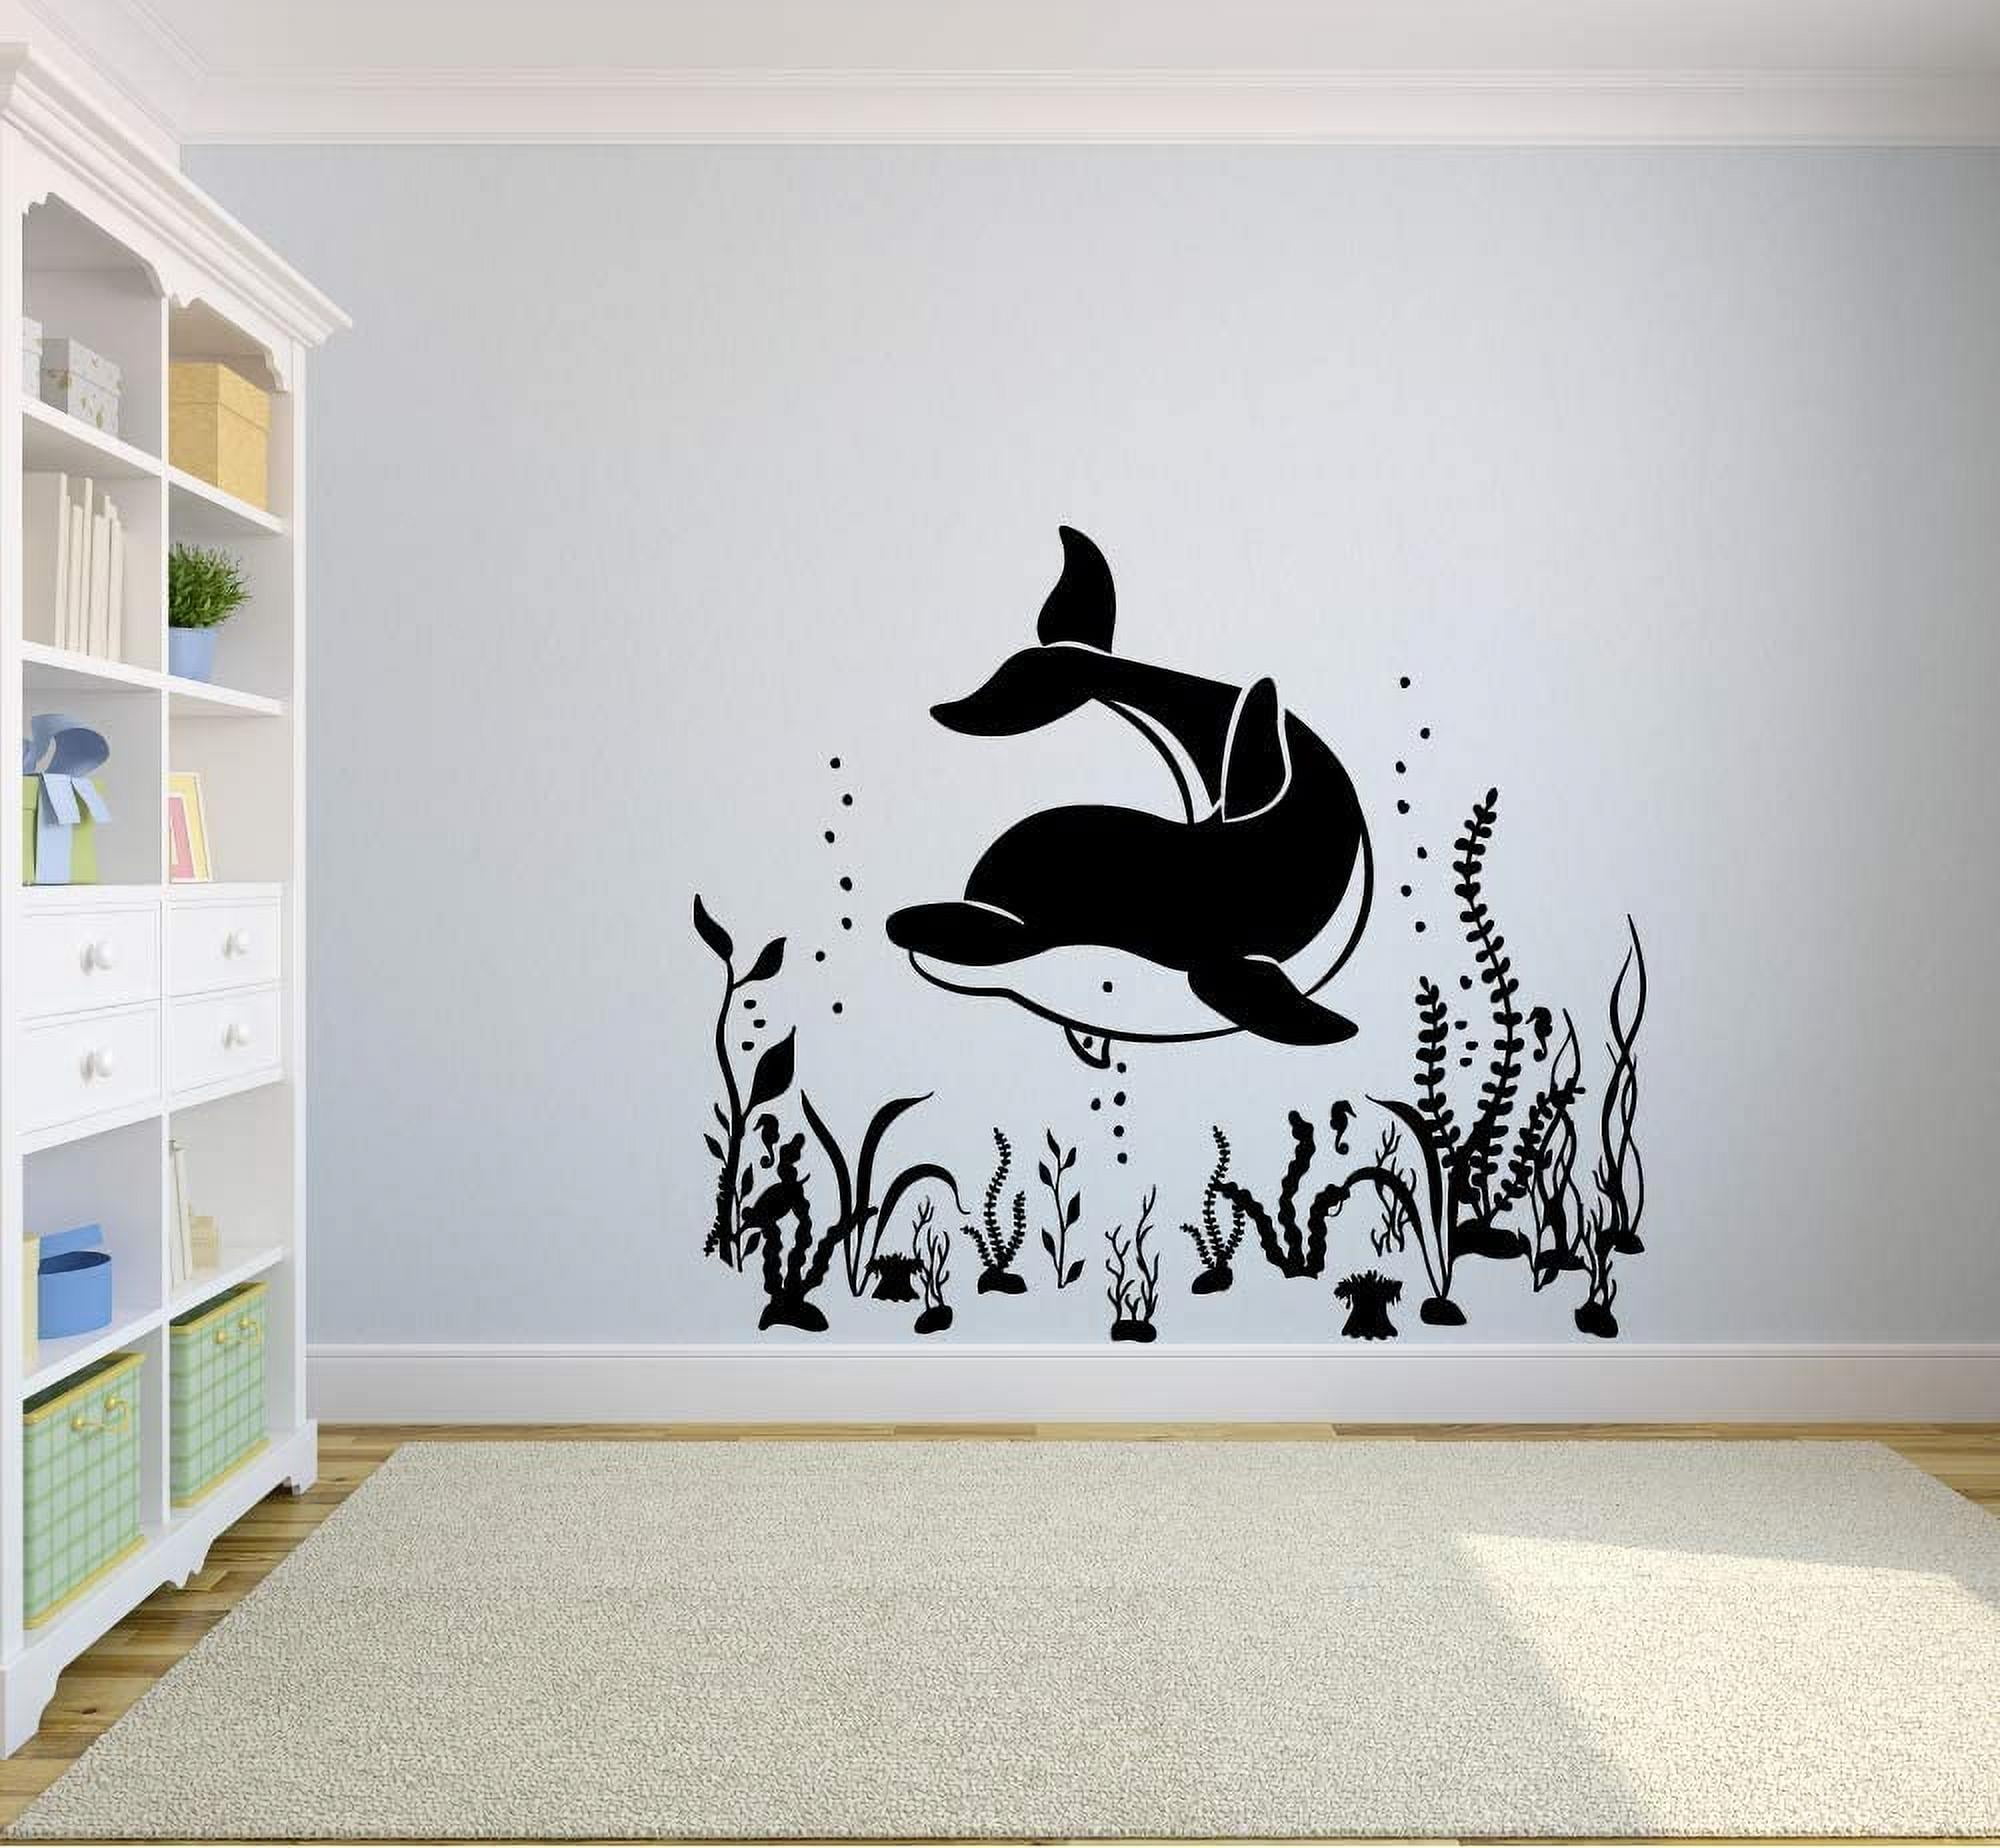 Home Decor Vinyl Wall Decal Big Fish Fishing Club Squid For Fisherman Hobby  Applique Interior Wallpaper 2kn9 - Wall Stickers - AliExpress